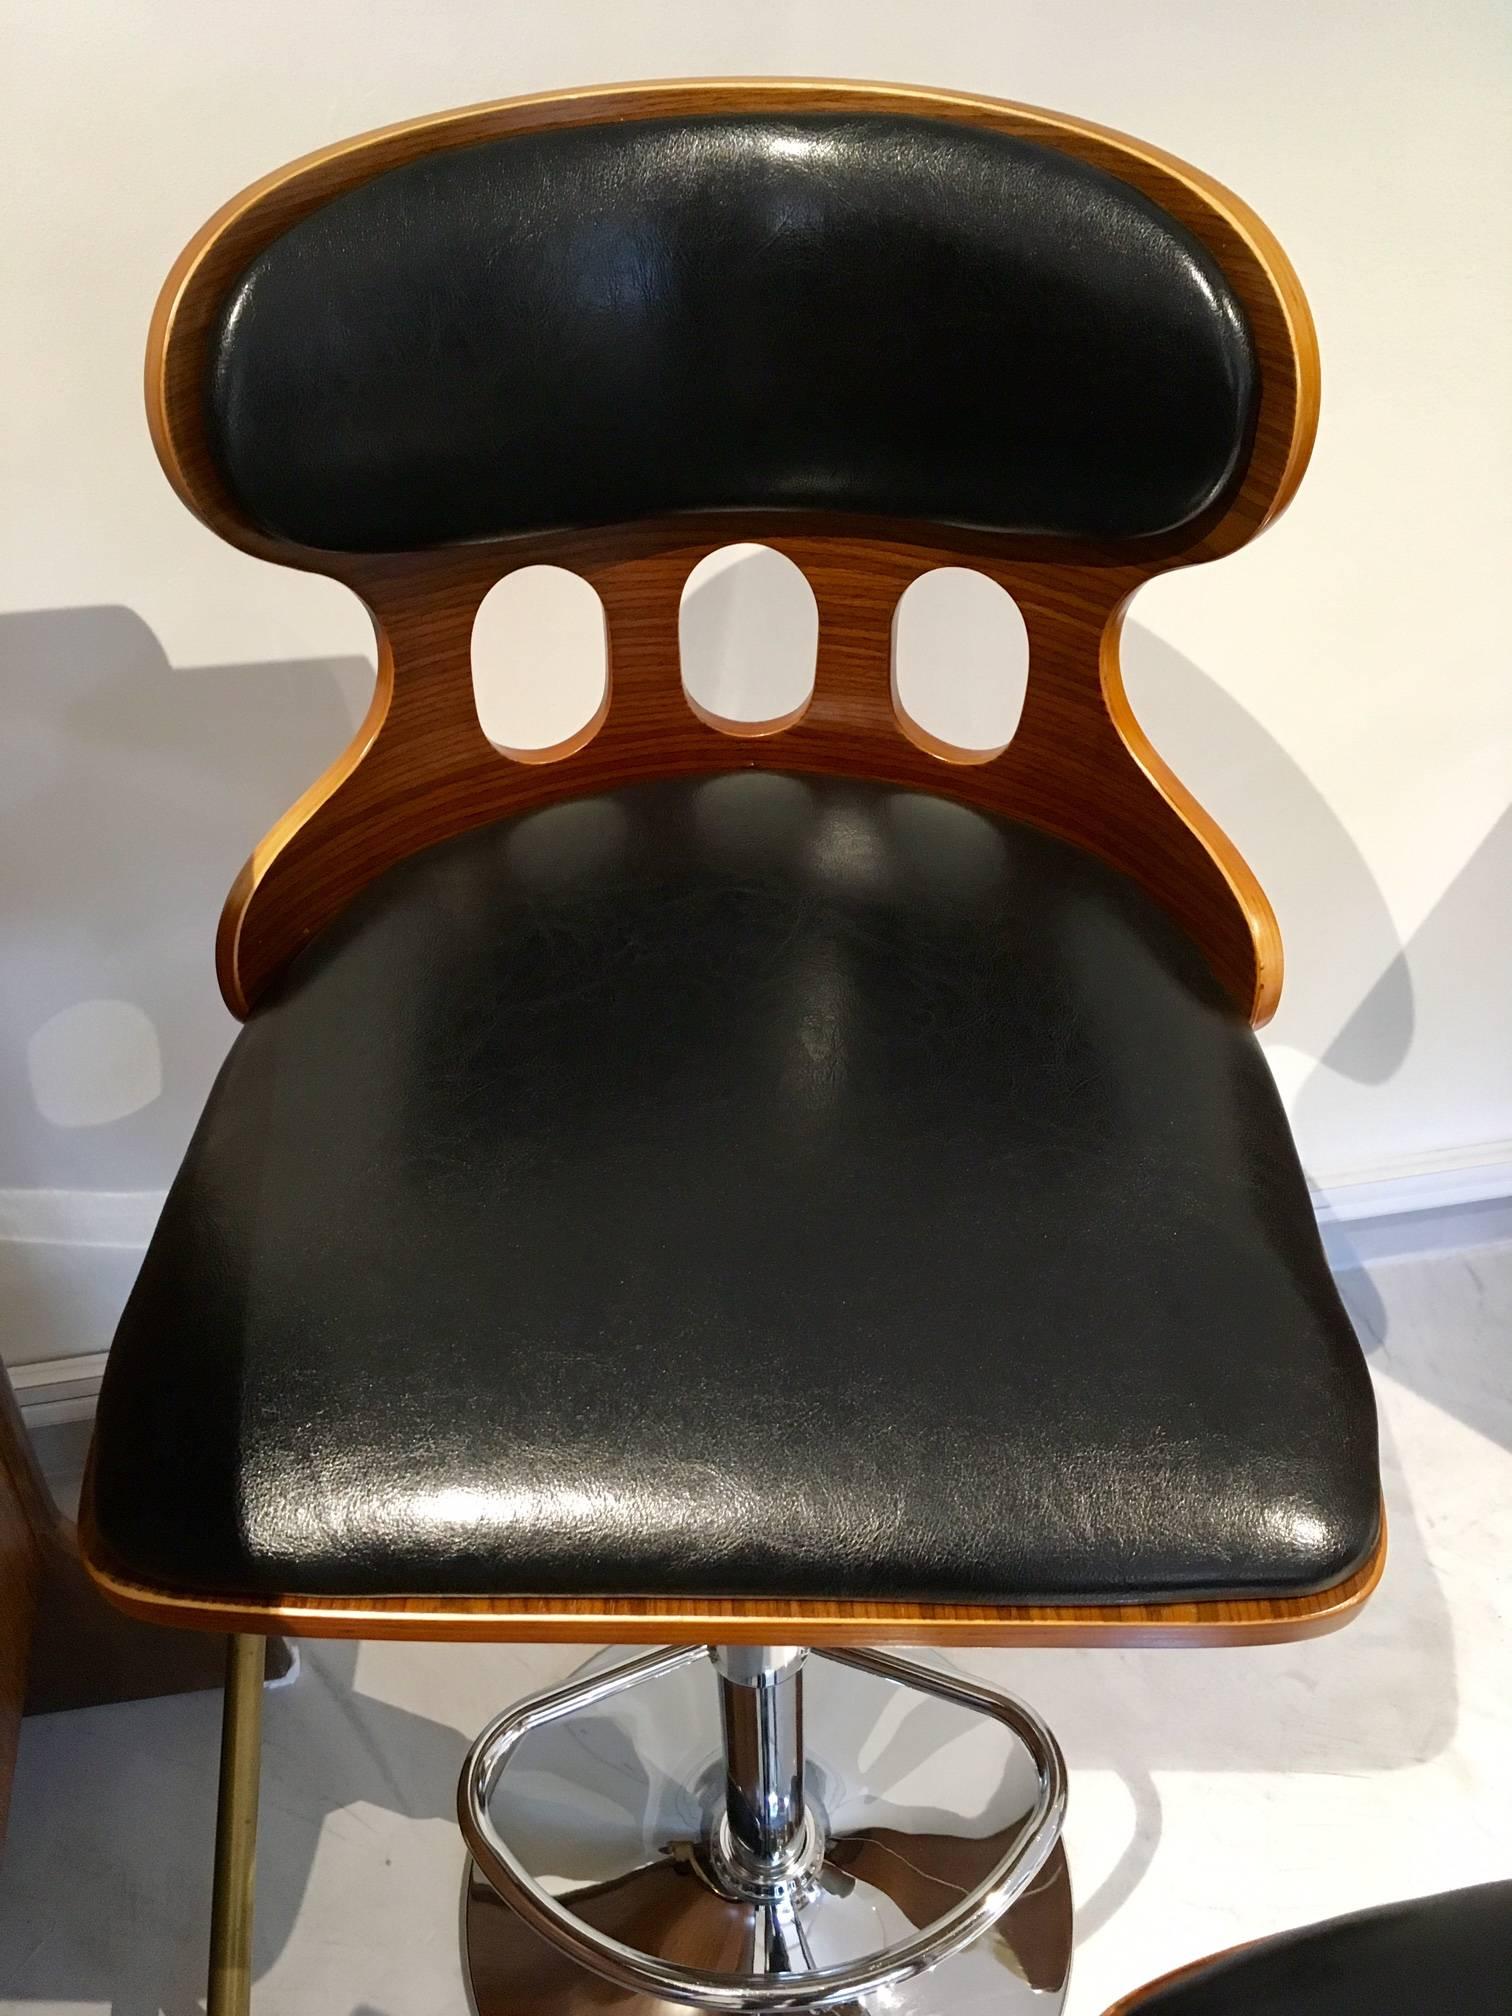 Veneer Pair of Contemporary Bar or Kitchen Stools with Black Seat Upholstery